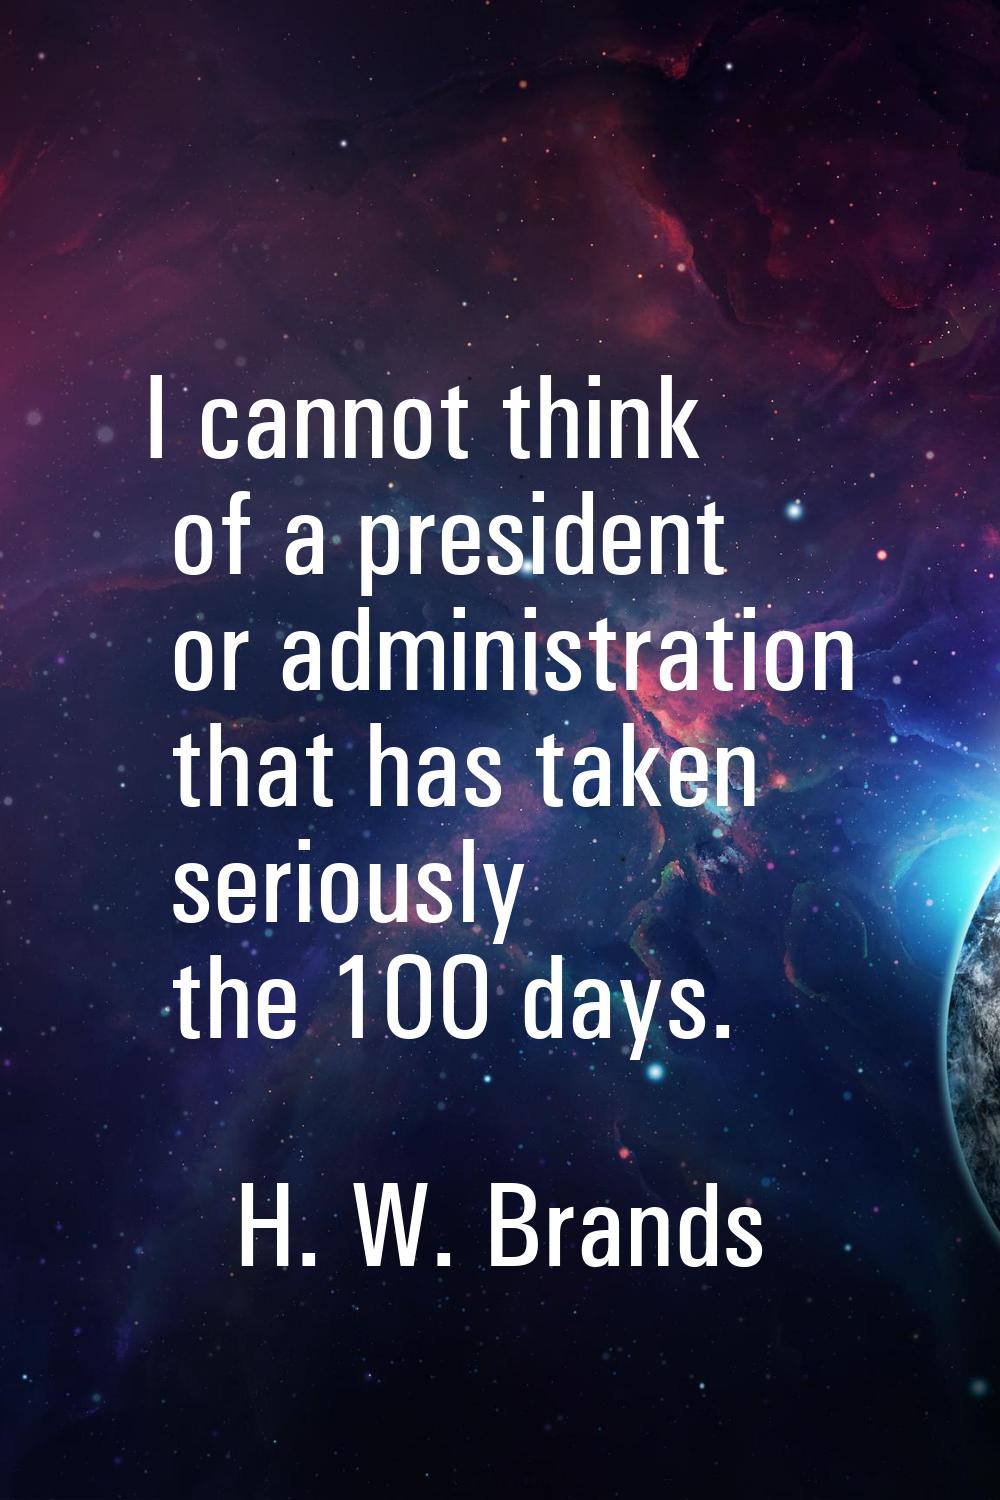 I cannot think of a president or administration that has taken seriously the 100 days.